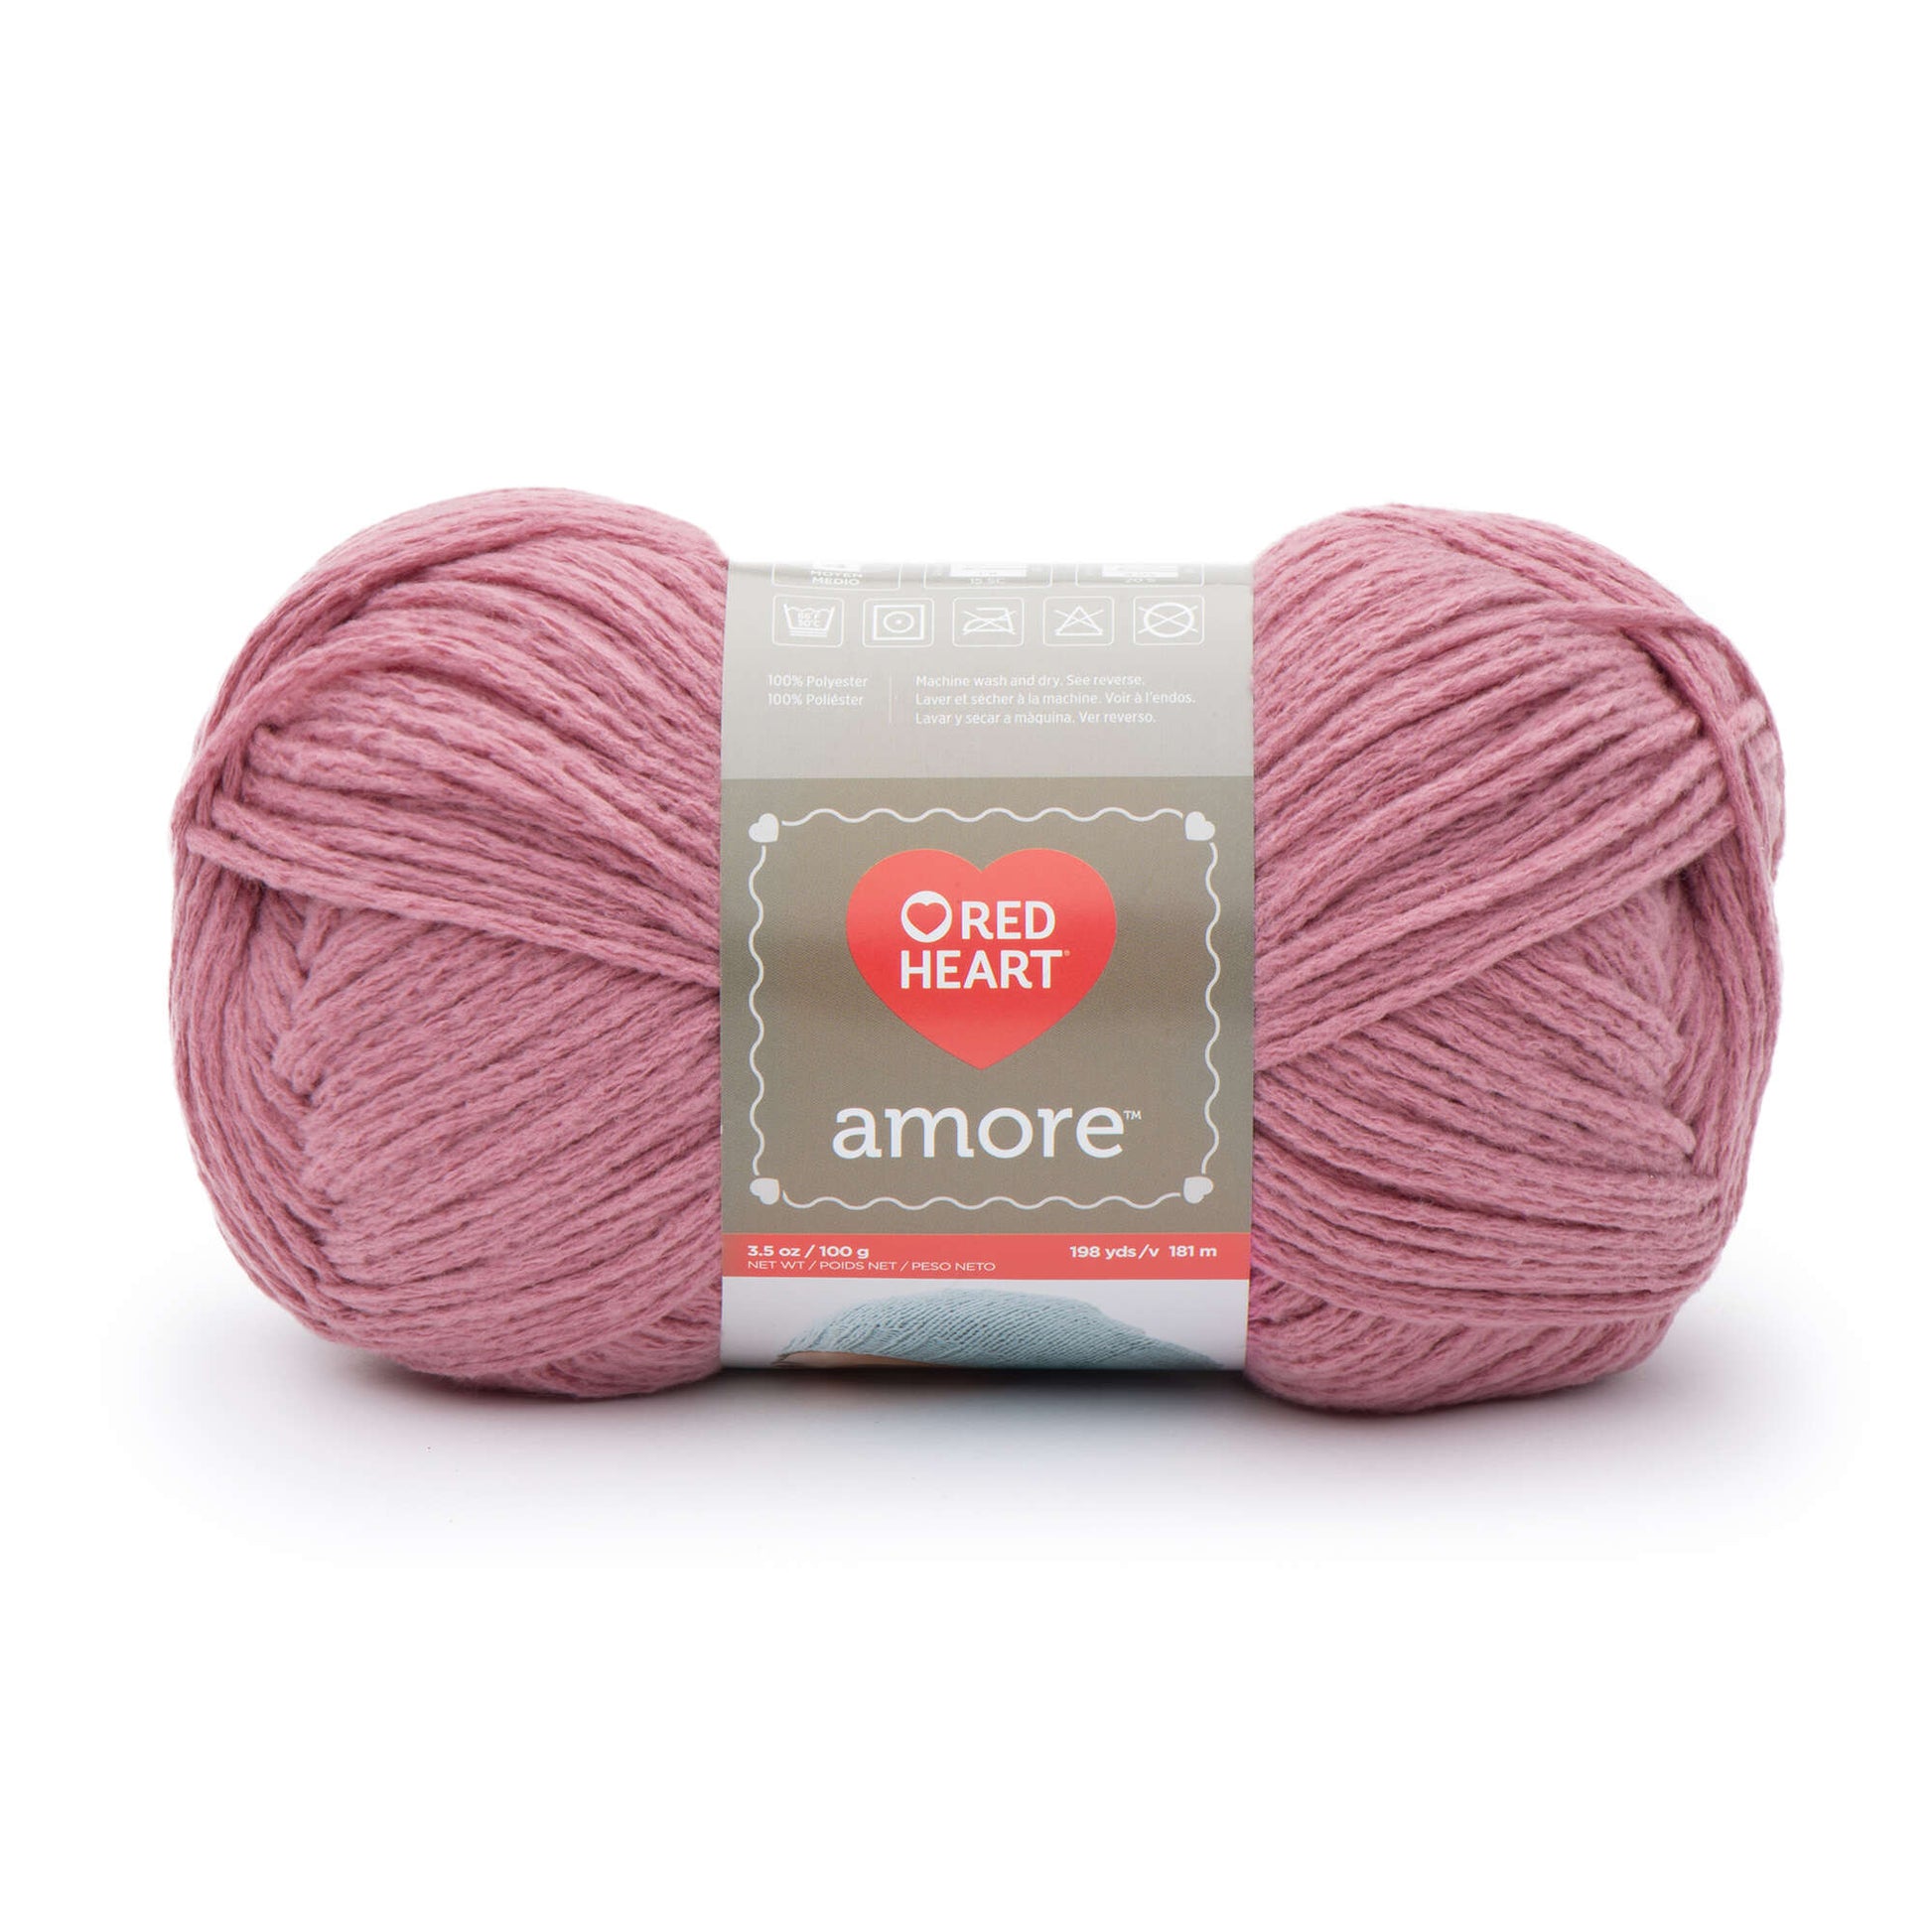 Red Heart Amore Yarn - Discontinued shades Blush